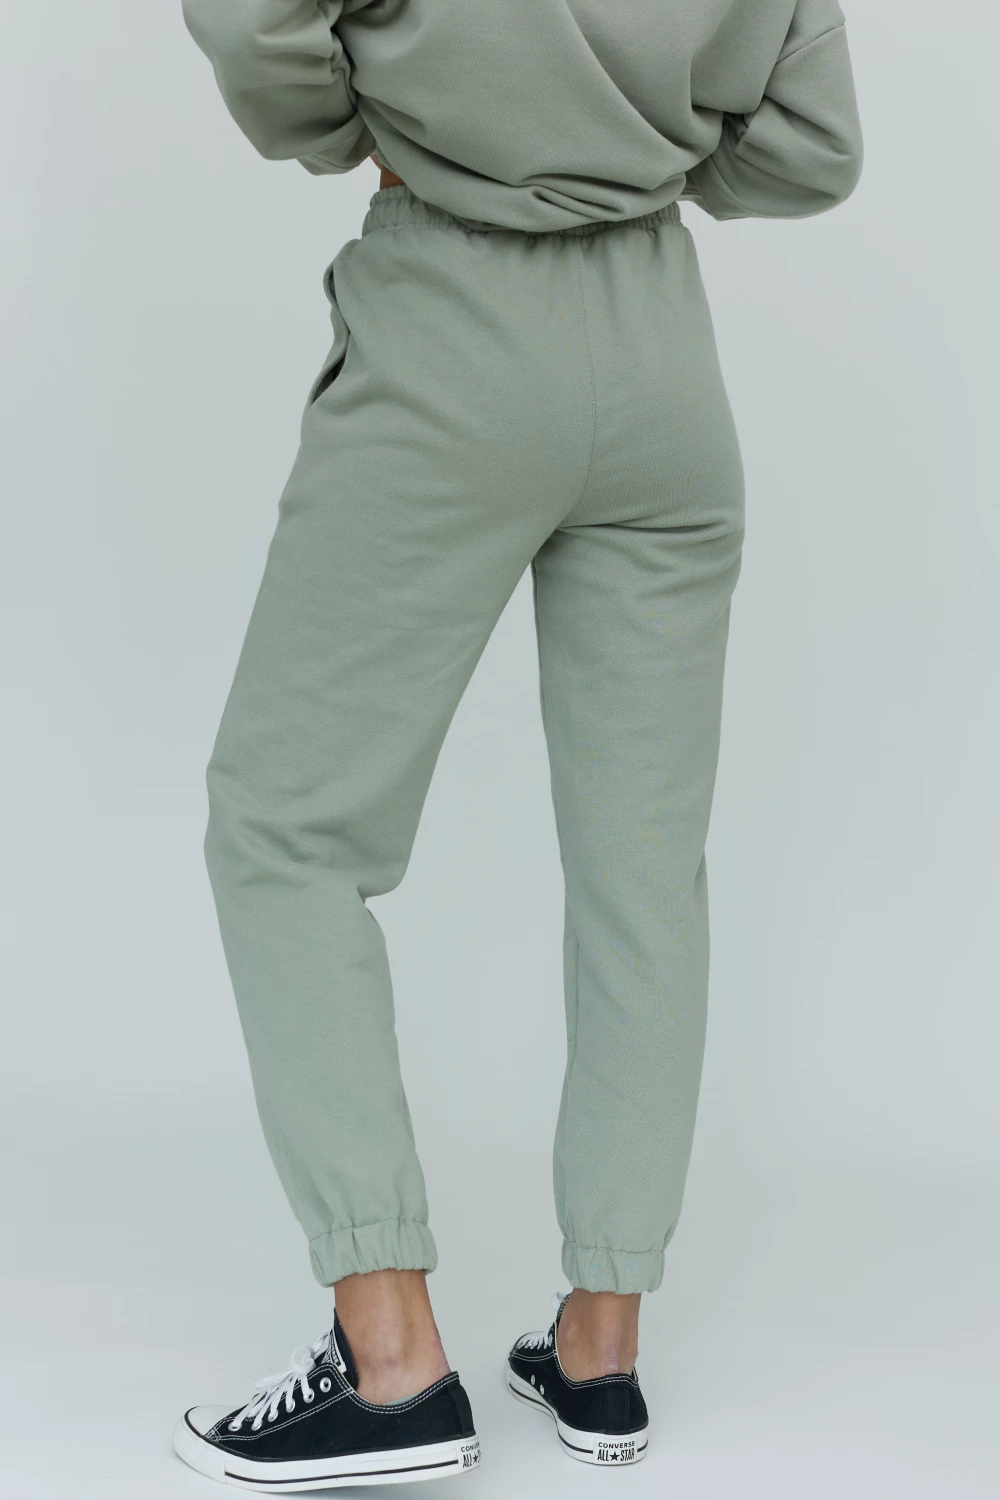 unisex pants in forest color